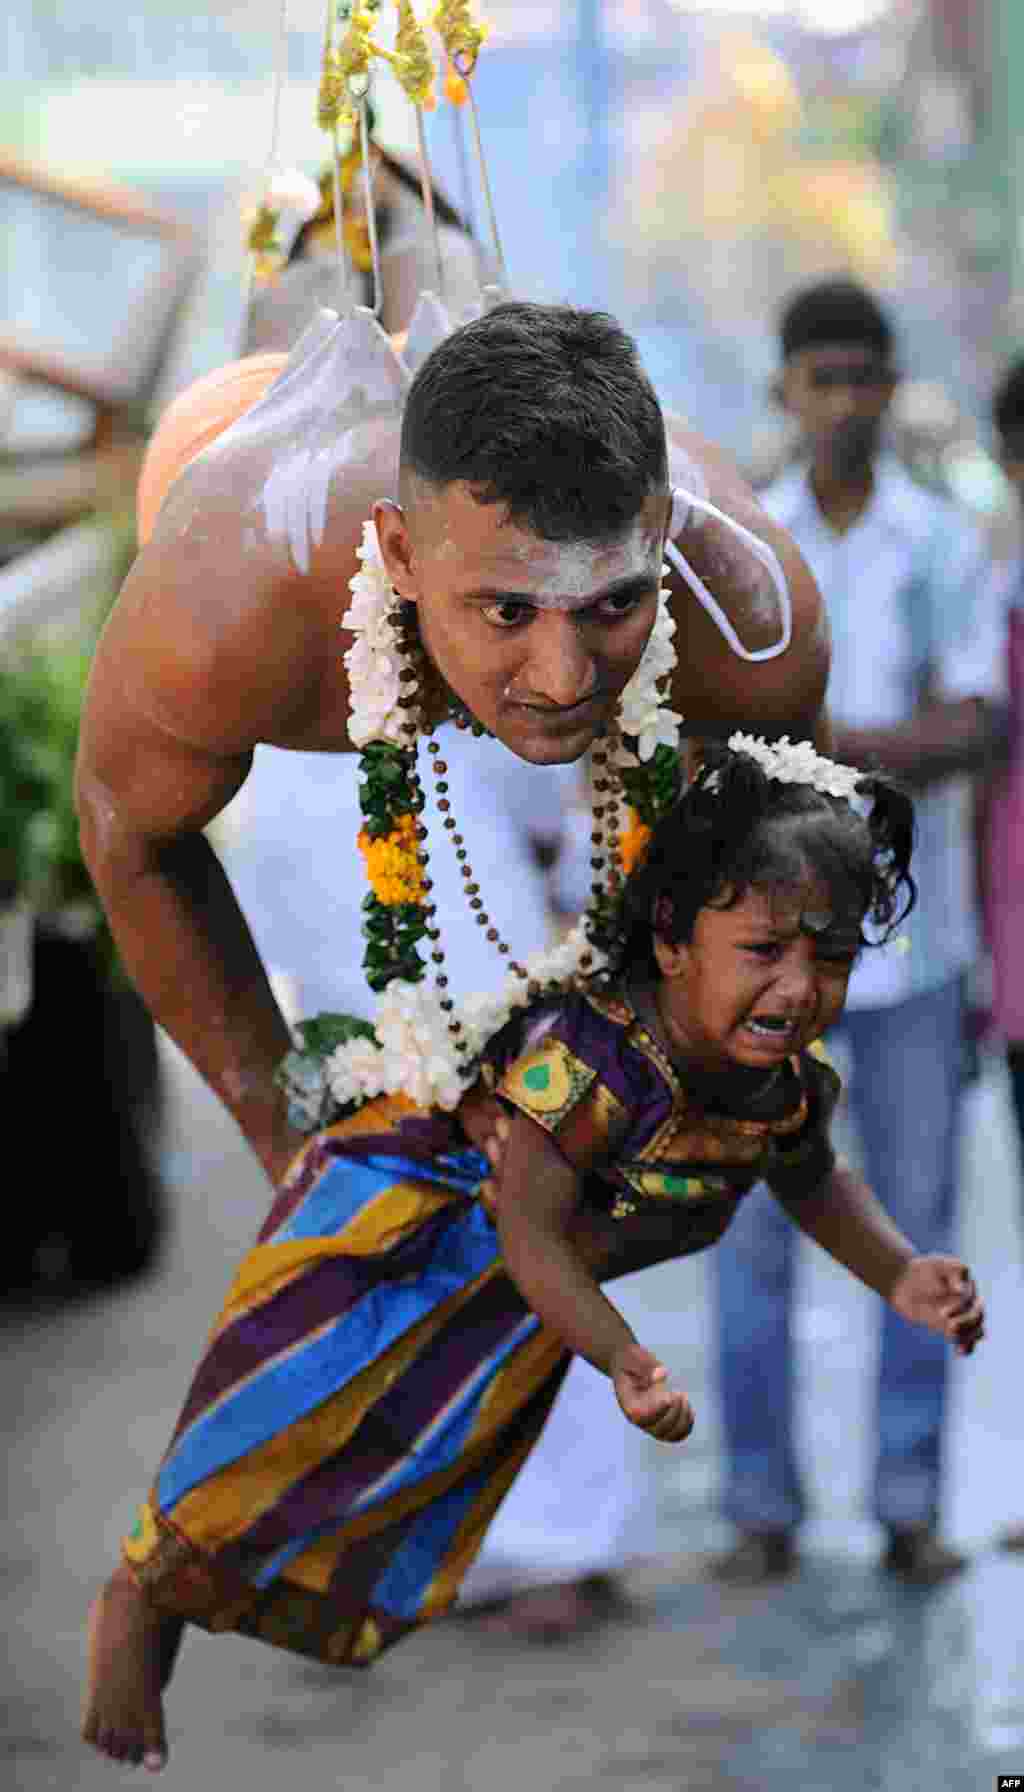 A Sri Lankan Tamil Hindu, suspended with hooks pierced through his body, carries a child while participating in the Vel Hinduism festival in Colombo.